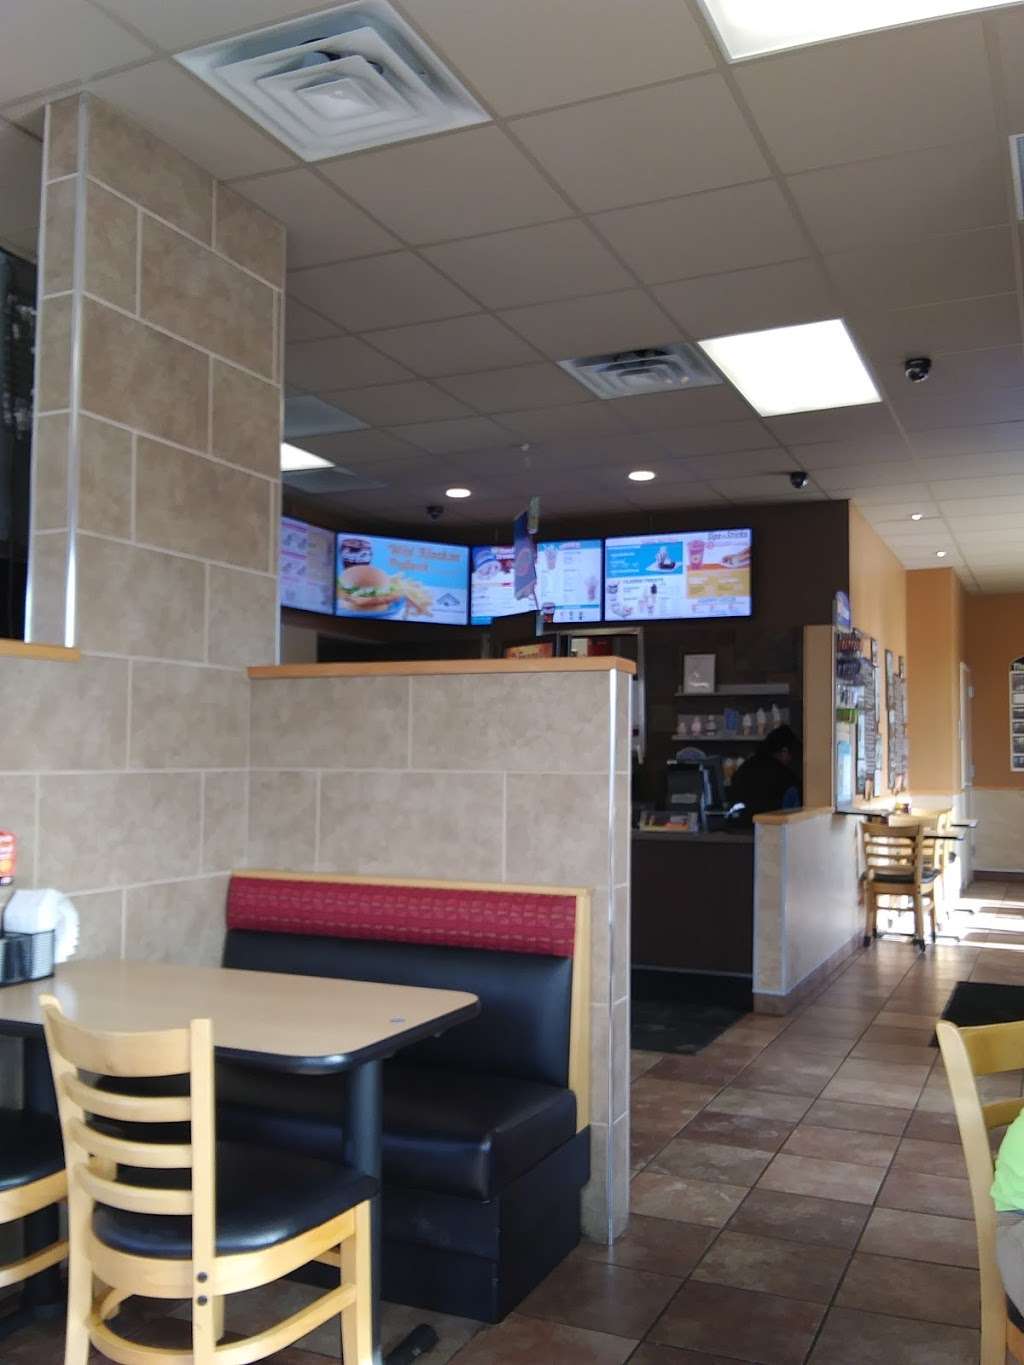 Dairy Queen Grill & Chill | 5625 Pebble Village Ln, Noblesville, IN 46062, USA | Phone: (317) 804-5218